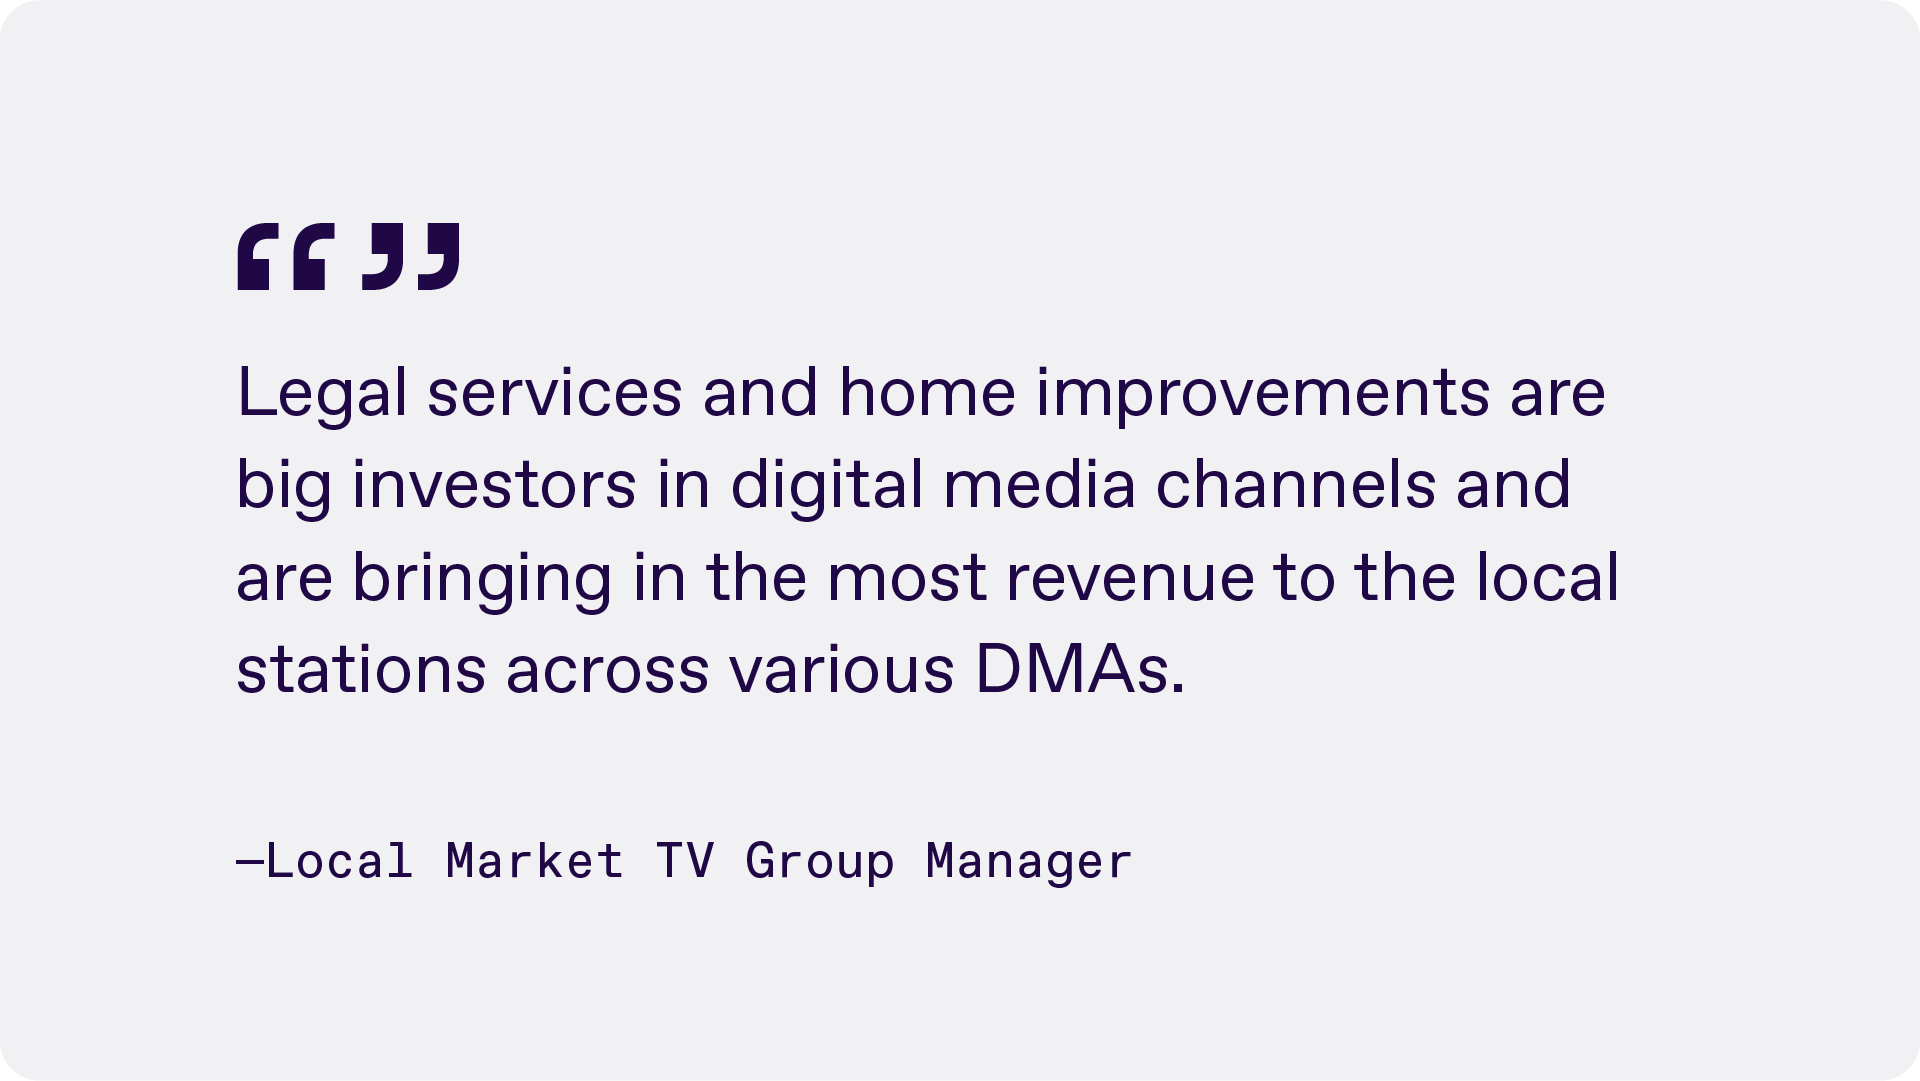 Quote that reads "Legal services and home improvements are big investors in digital media channels and are bringing in the most revenue to the local stations across various DMAs" from a local market TV group manager